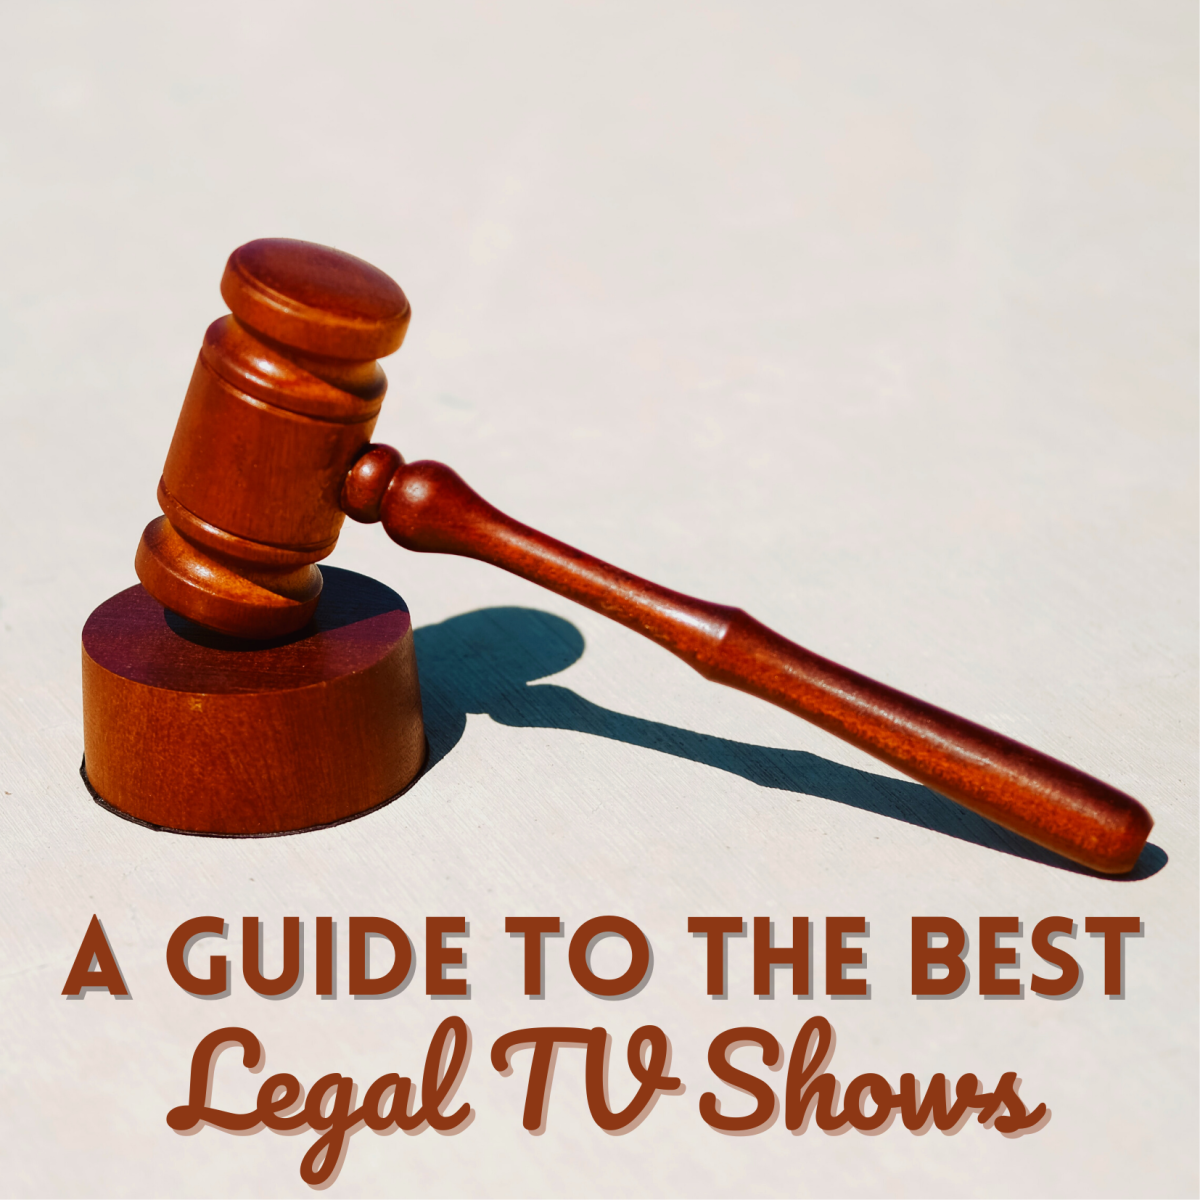 The best TV lawyers from the 1960s to the 2000s